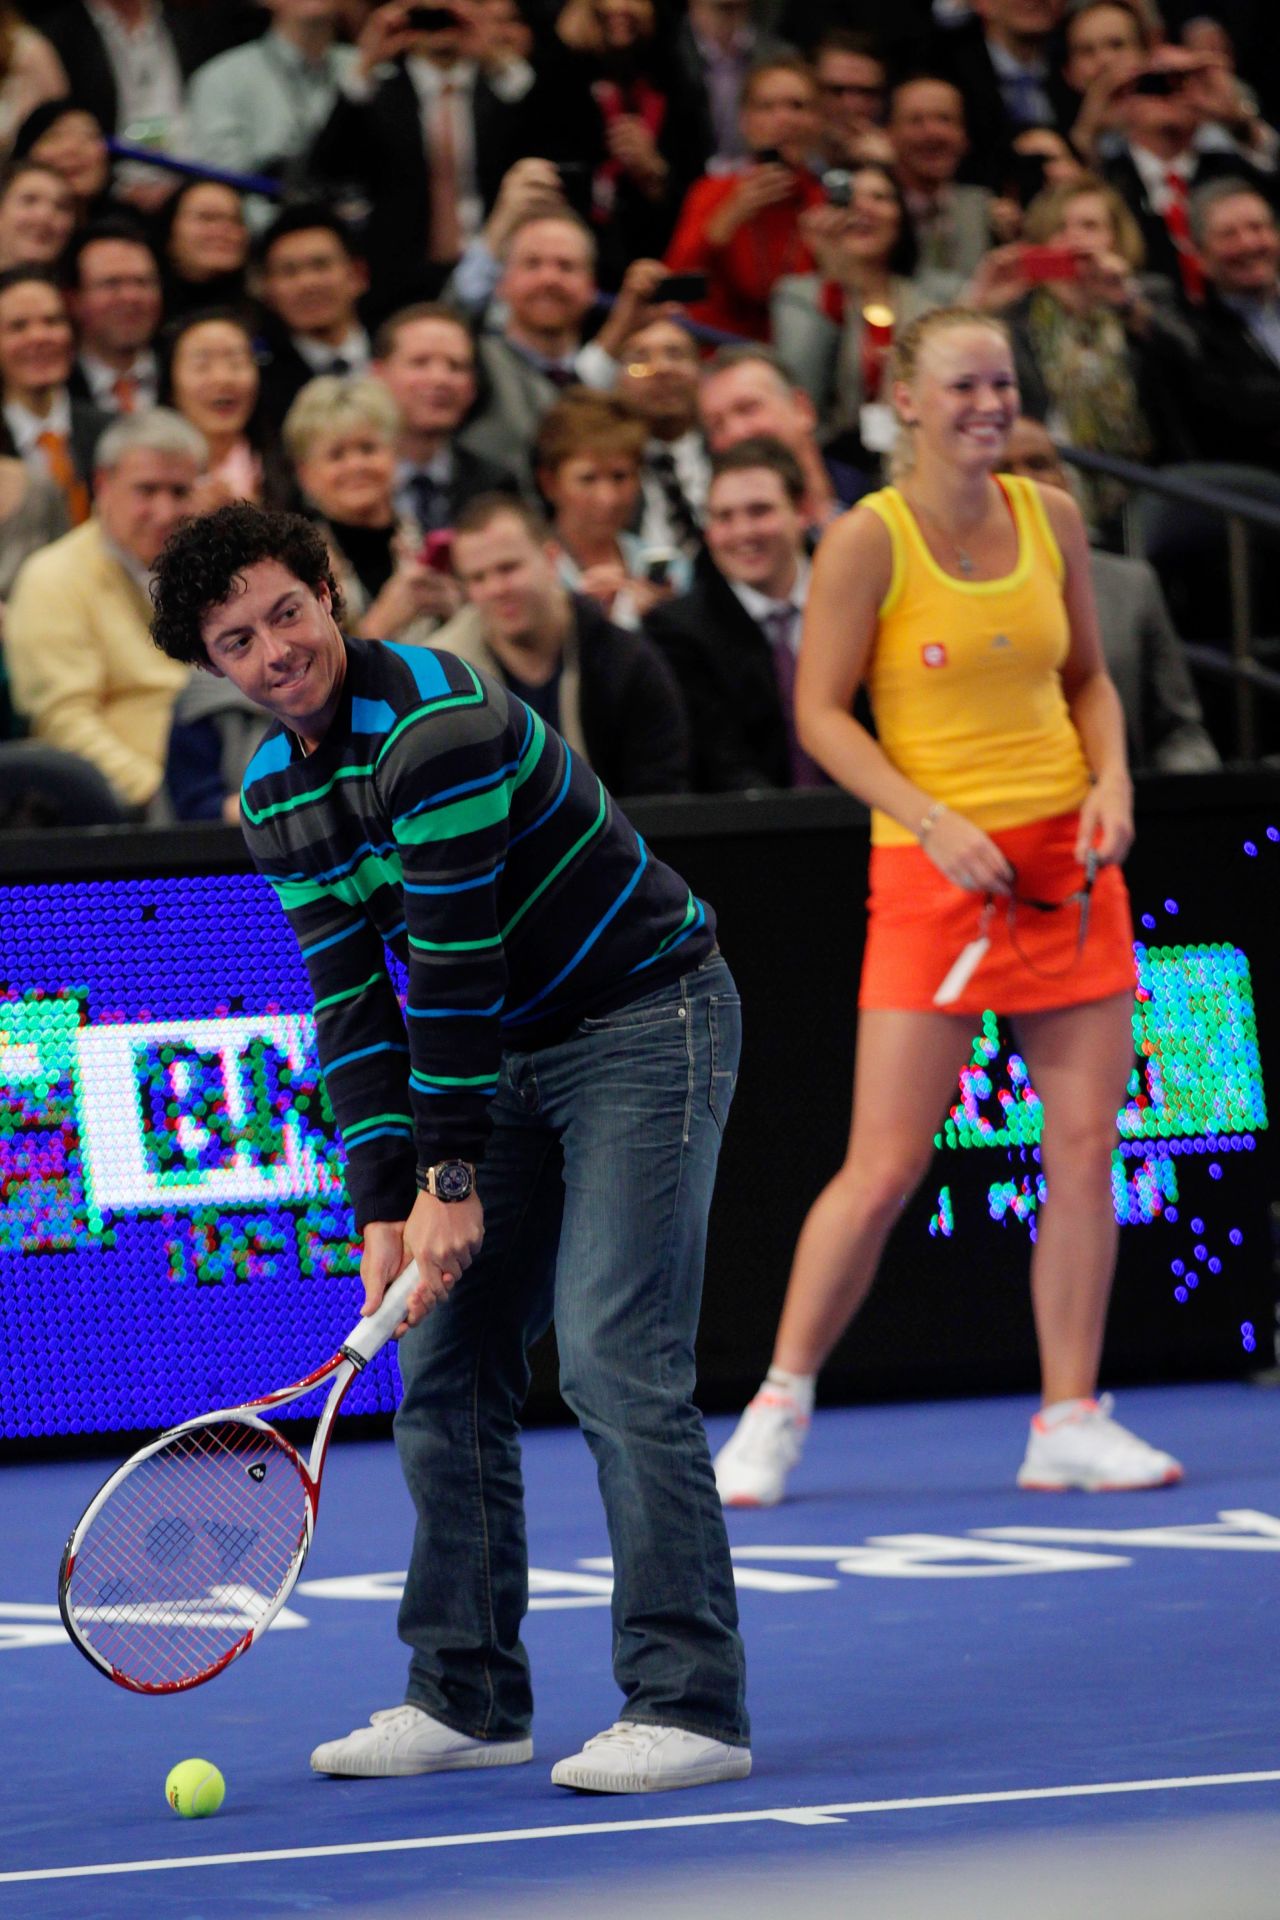 Wrong sport Rory ! McIlroy addresses a tennis ball golf style with Maria Sharapova at the other end.